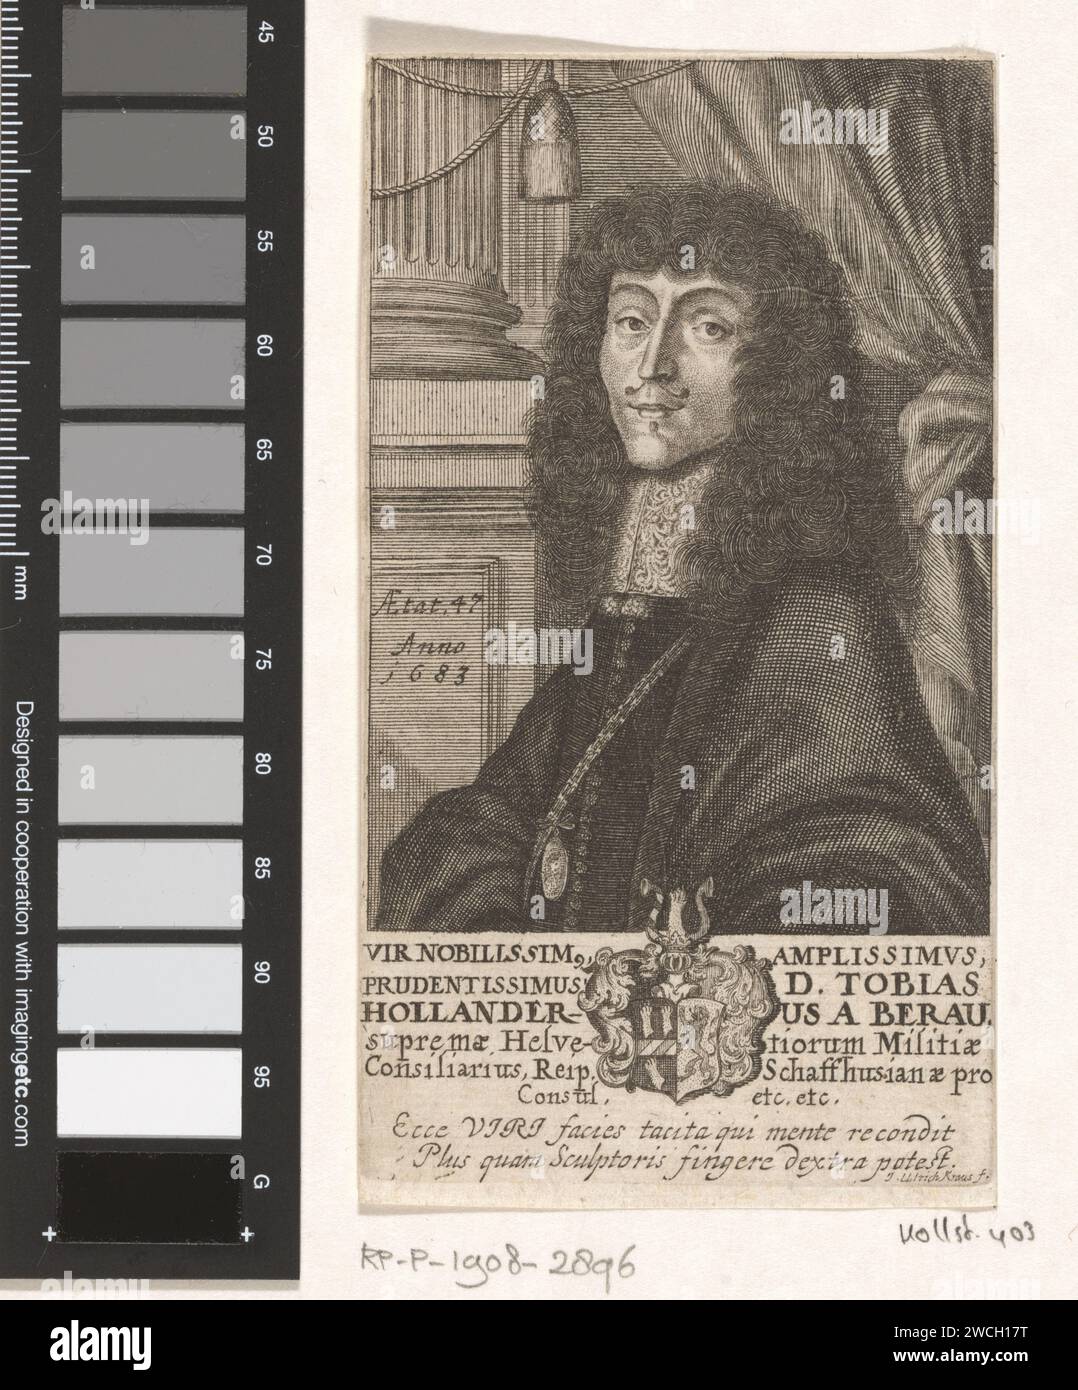 Portrait of Tobias Hollander von Berau at the age of 47, Johann Ulrich Kraus, 1683 print Text in Latin in the lower margin.  paper engraving historical persons. mayor, burgomaster Stock Photo